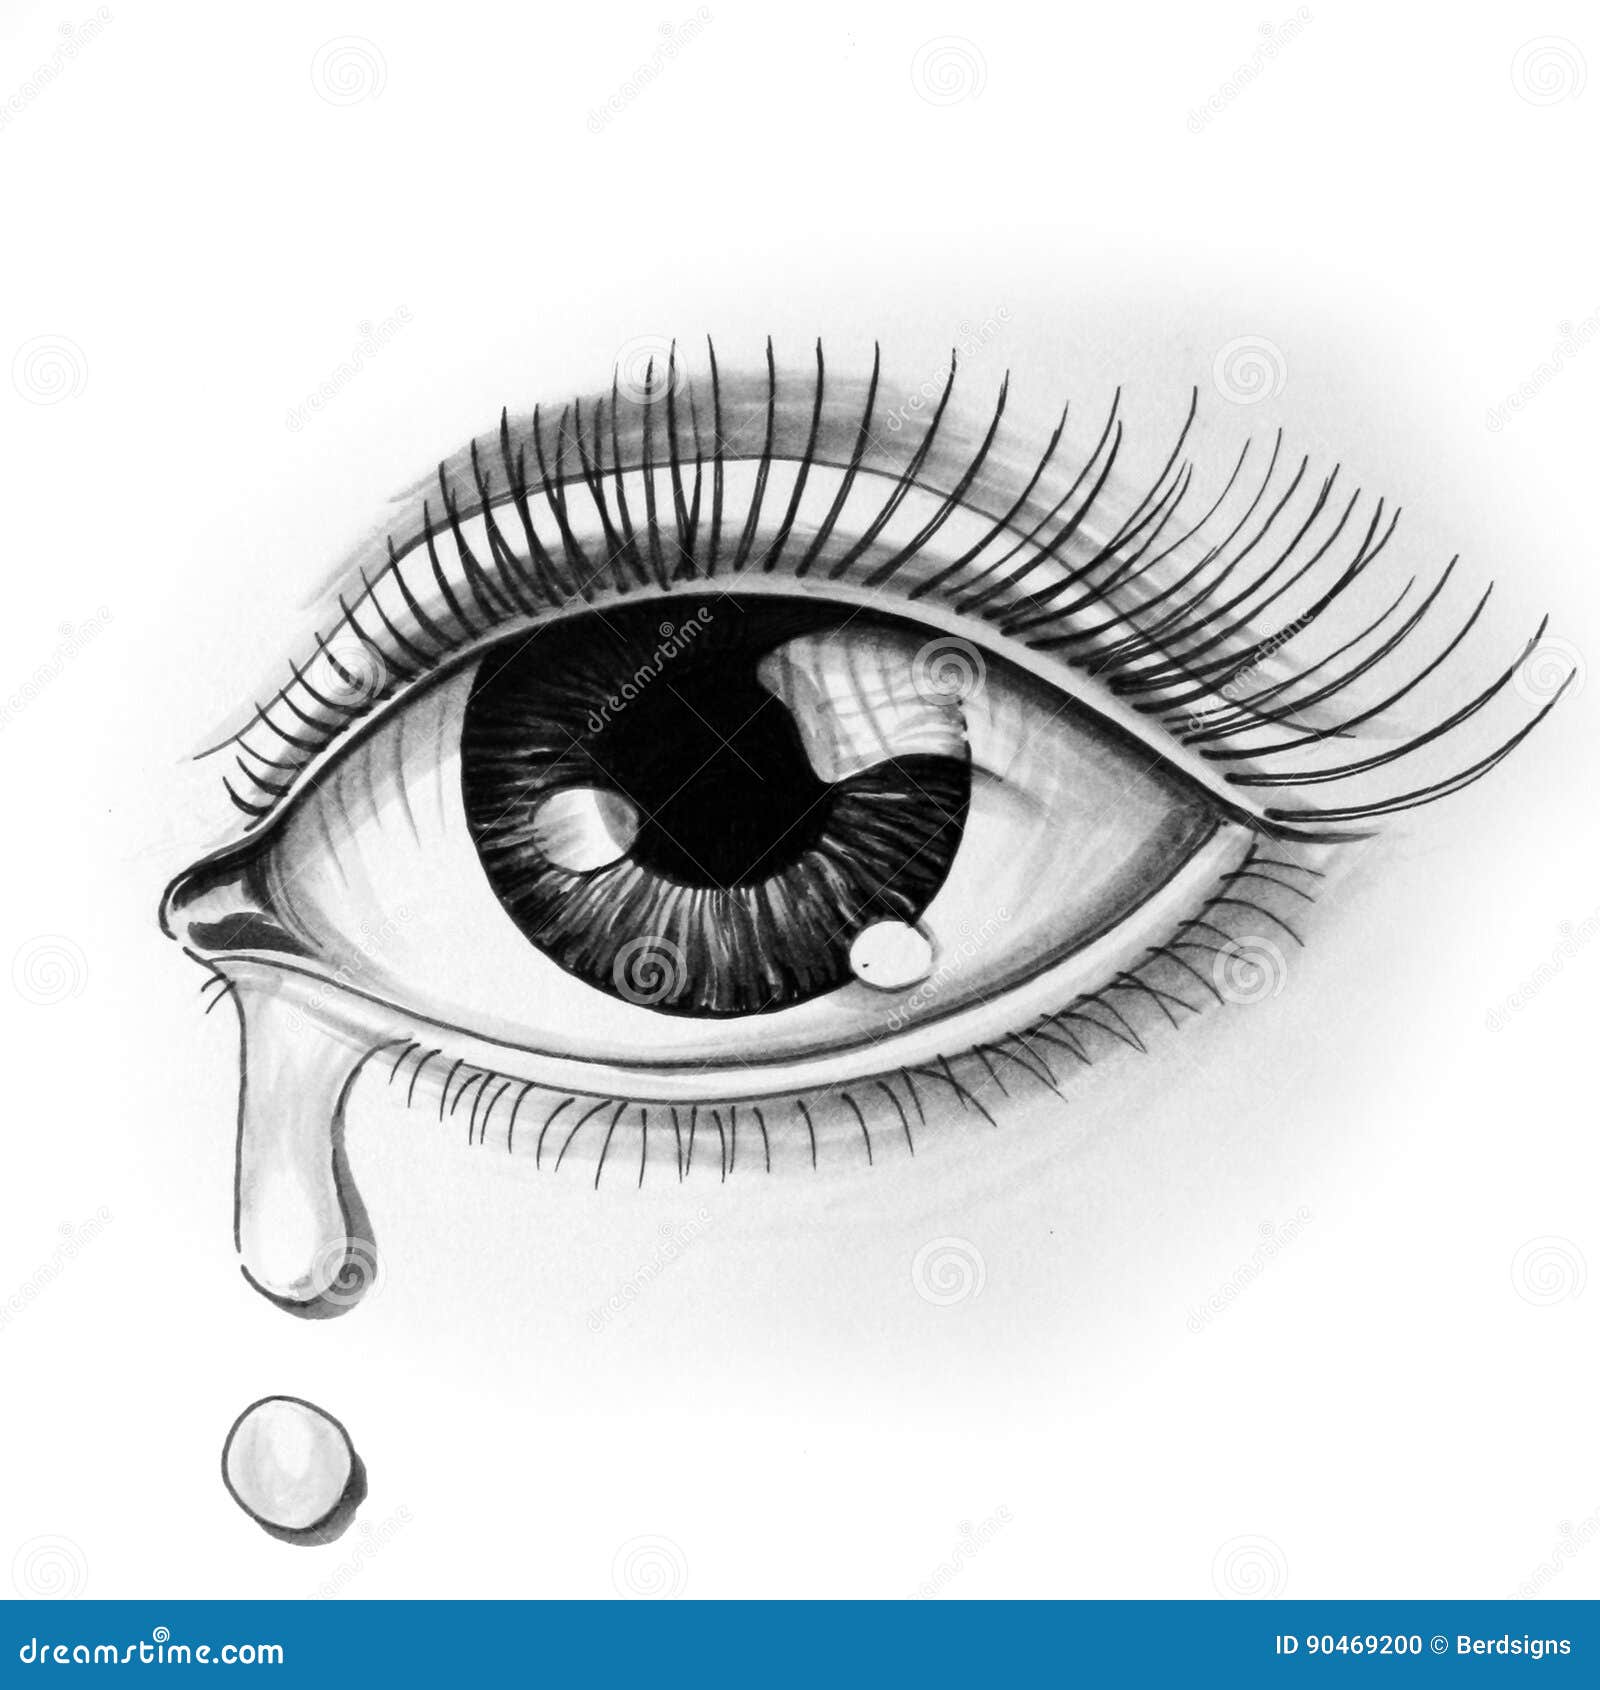 childs drawing  black and white picture of human eye close up hand drawing  by pencil Stock Photo  Alamy